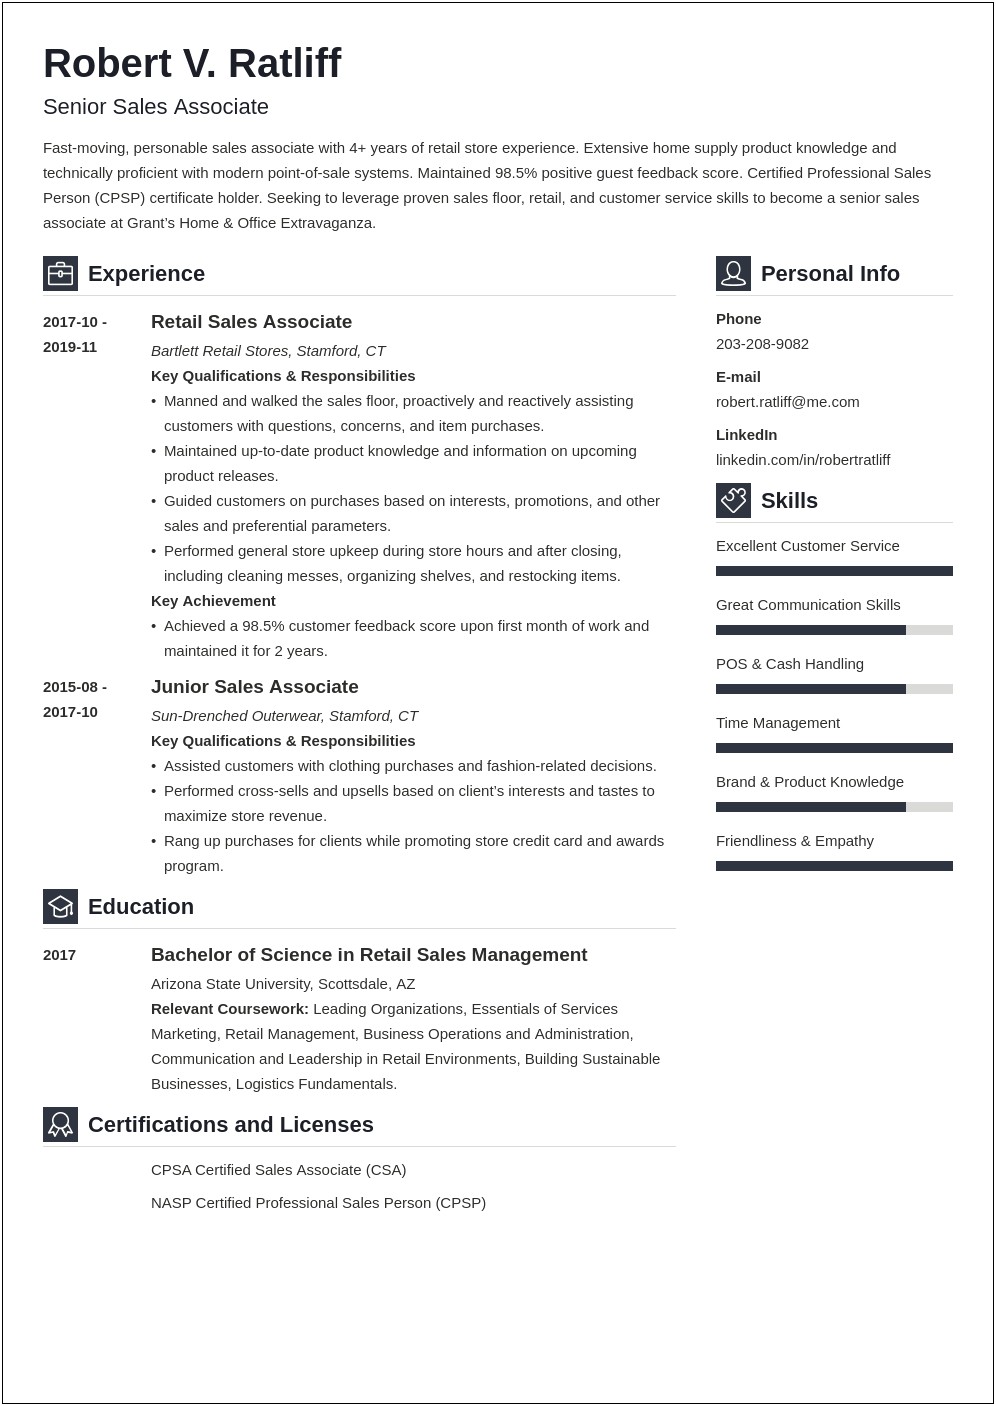 Sample Resume With Target Job Title